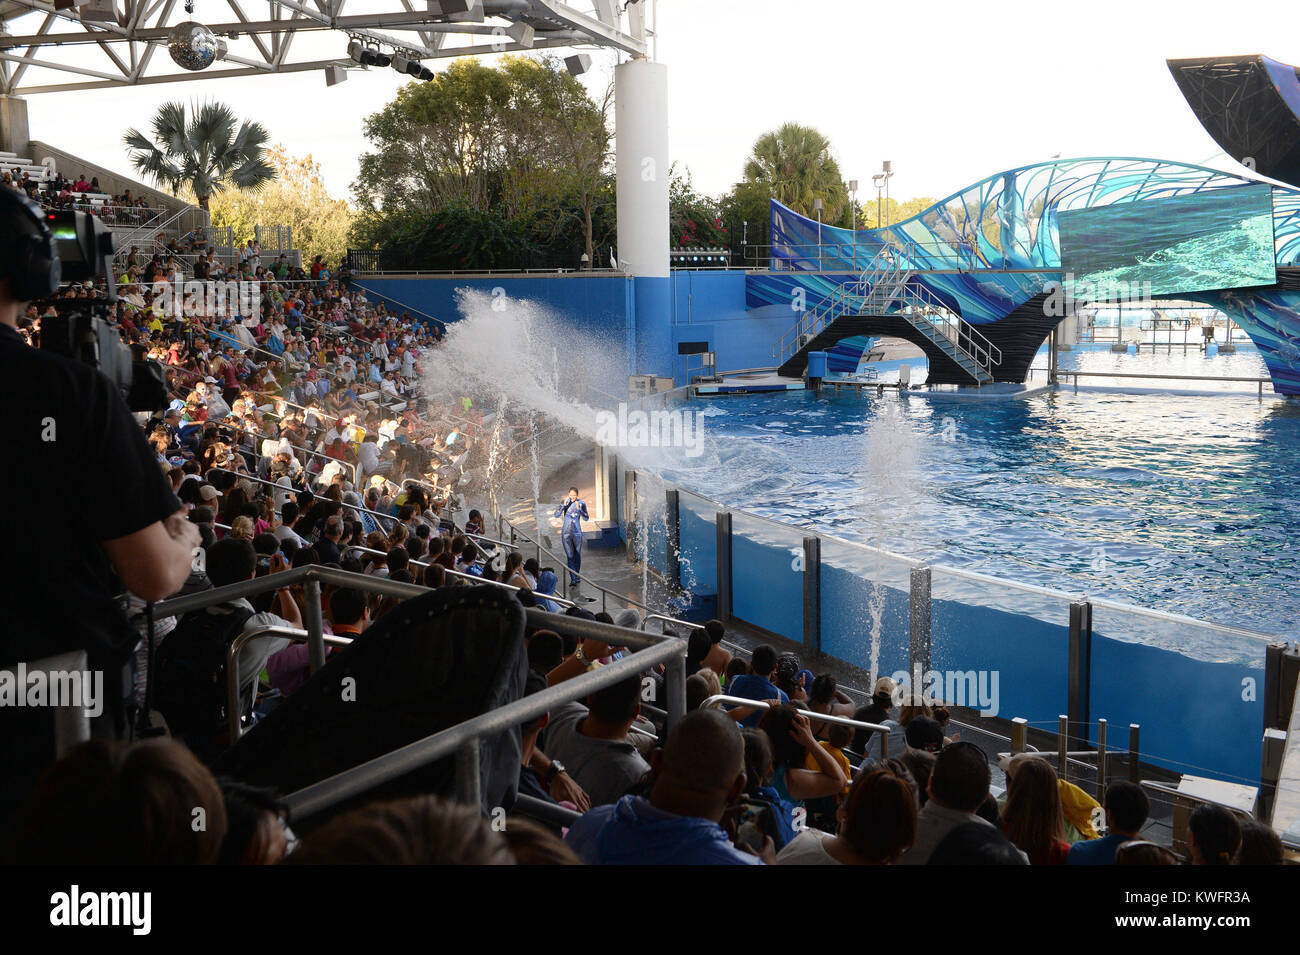 ORLANDO, FL - AUGUST 15: SeaWorld has announced a new 10 million-gallon killer whale environment in San Diego, nearly double the size of the existing facility. Similar environments are planned for SeaWorld Orlando and SeaWorld San Antonio, the company said on Friday. The new facility measures 350 feet across and 50 feet deep, a size that SeaWorld says will “support the whales' broad range of behaviors and provide choices that can challenge the whales both physically and mentally.” SeaWorld also pledged $10 million in matching funds for orca research. The company's stock plummeted 33 percent on Stock Photo